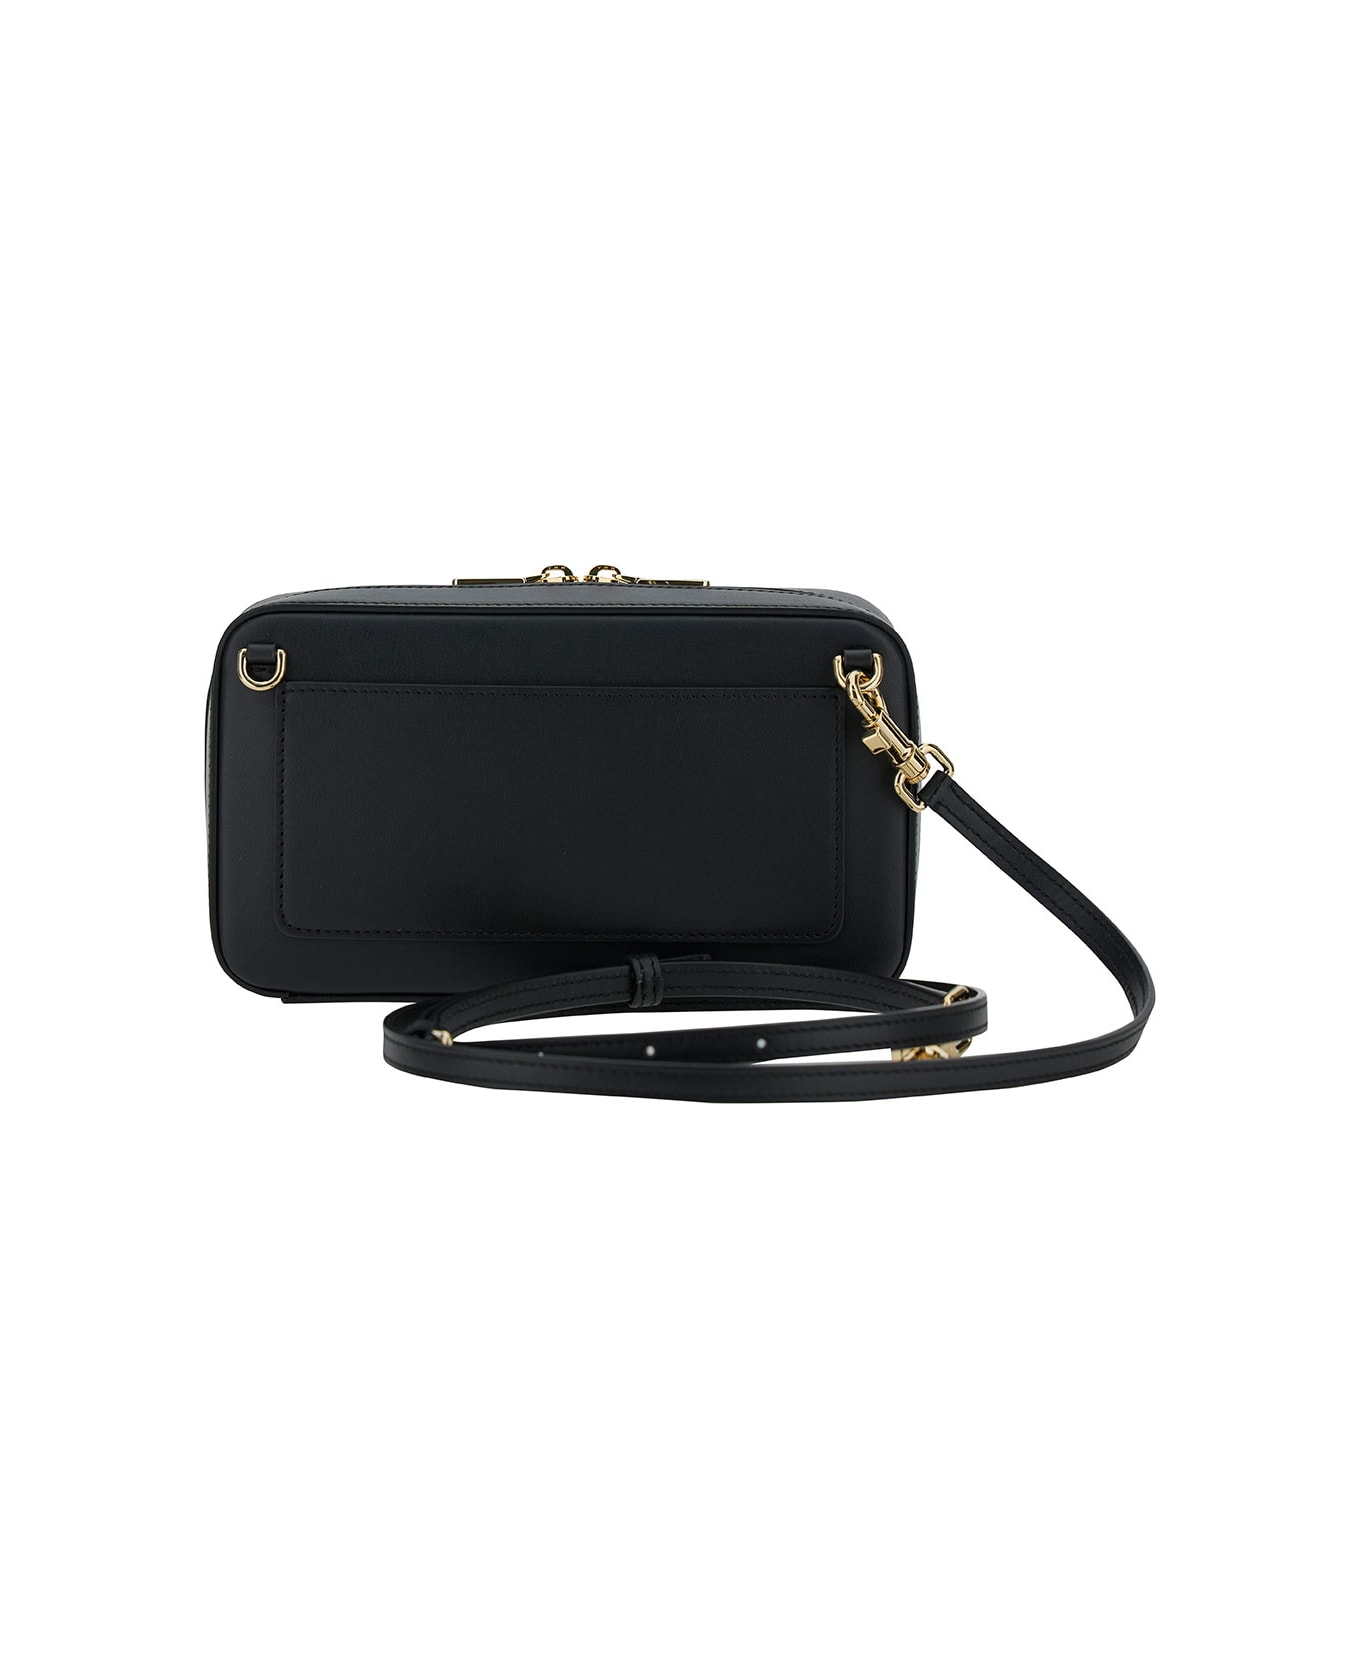 Dolce & Gabbana Black Crossbody Bag With Quilted Dg Logo In Leather Woman - Black